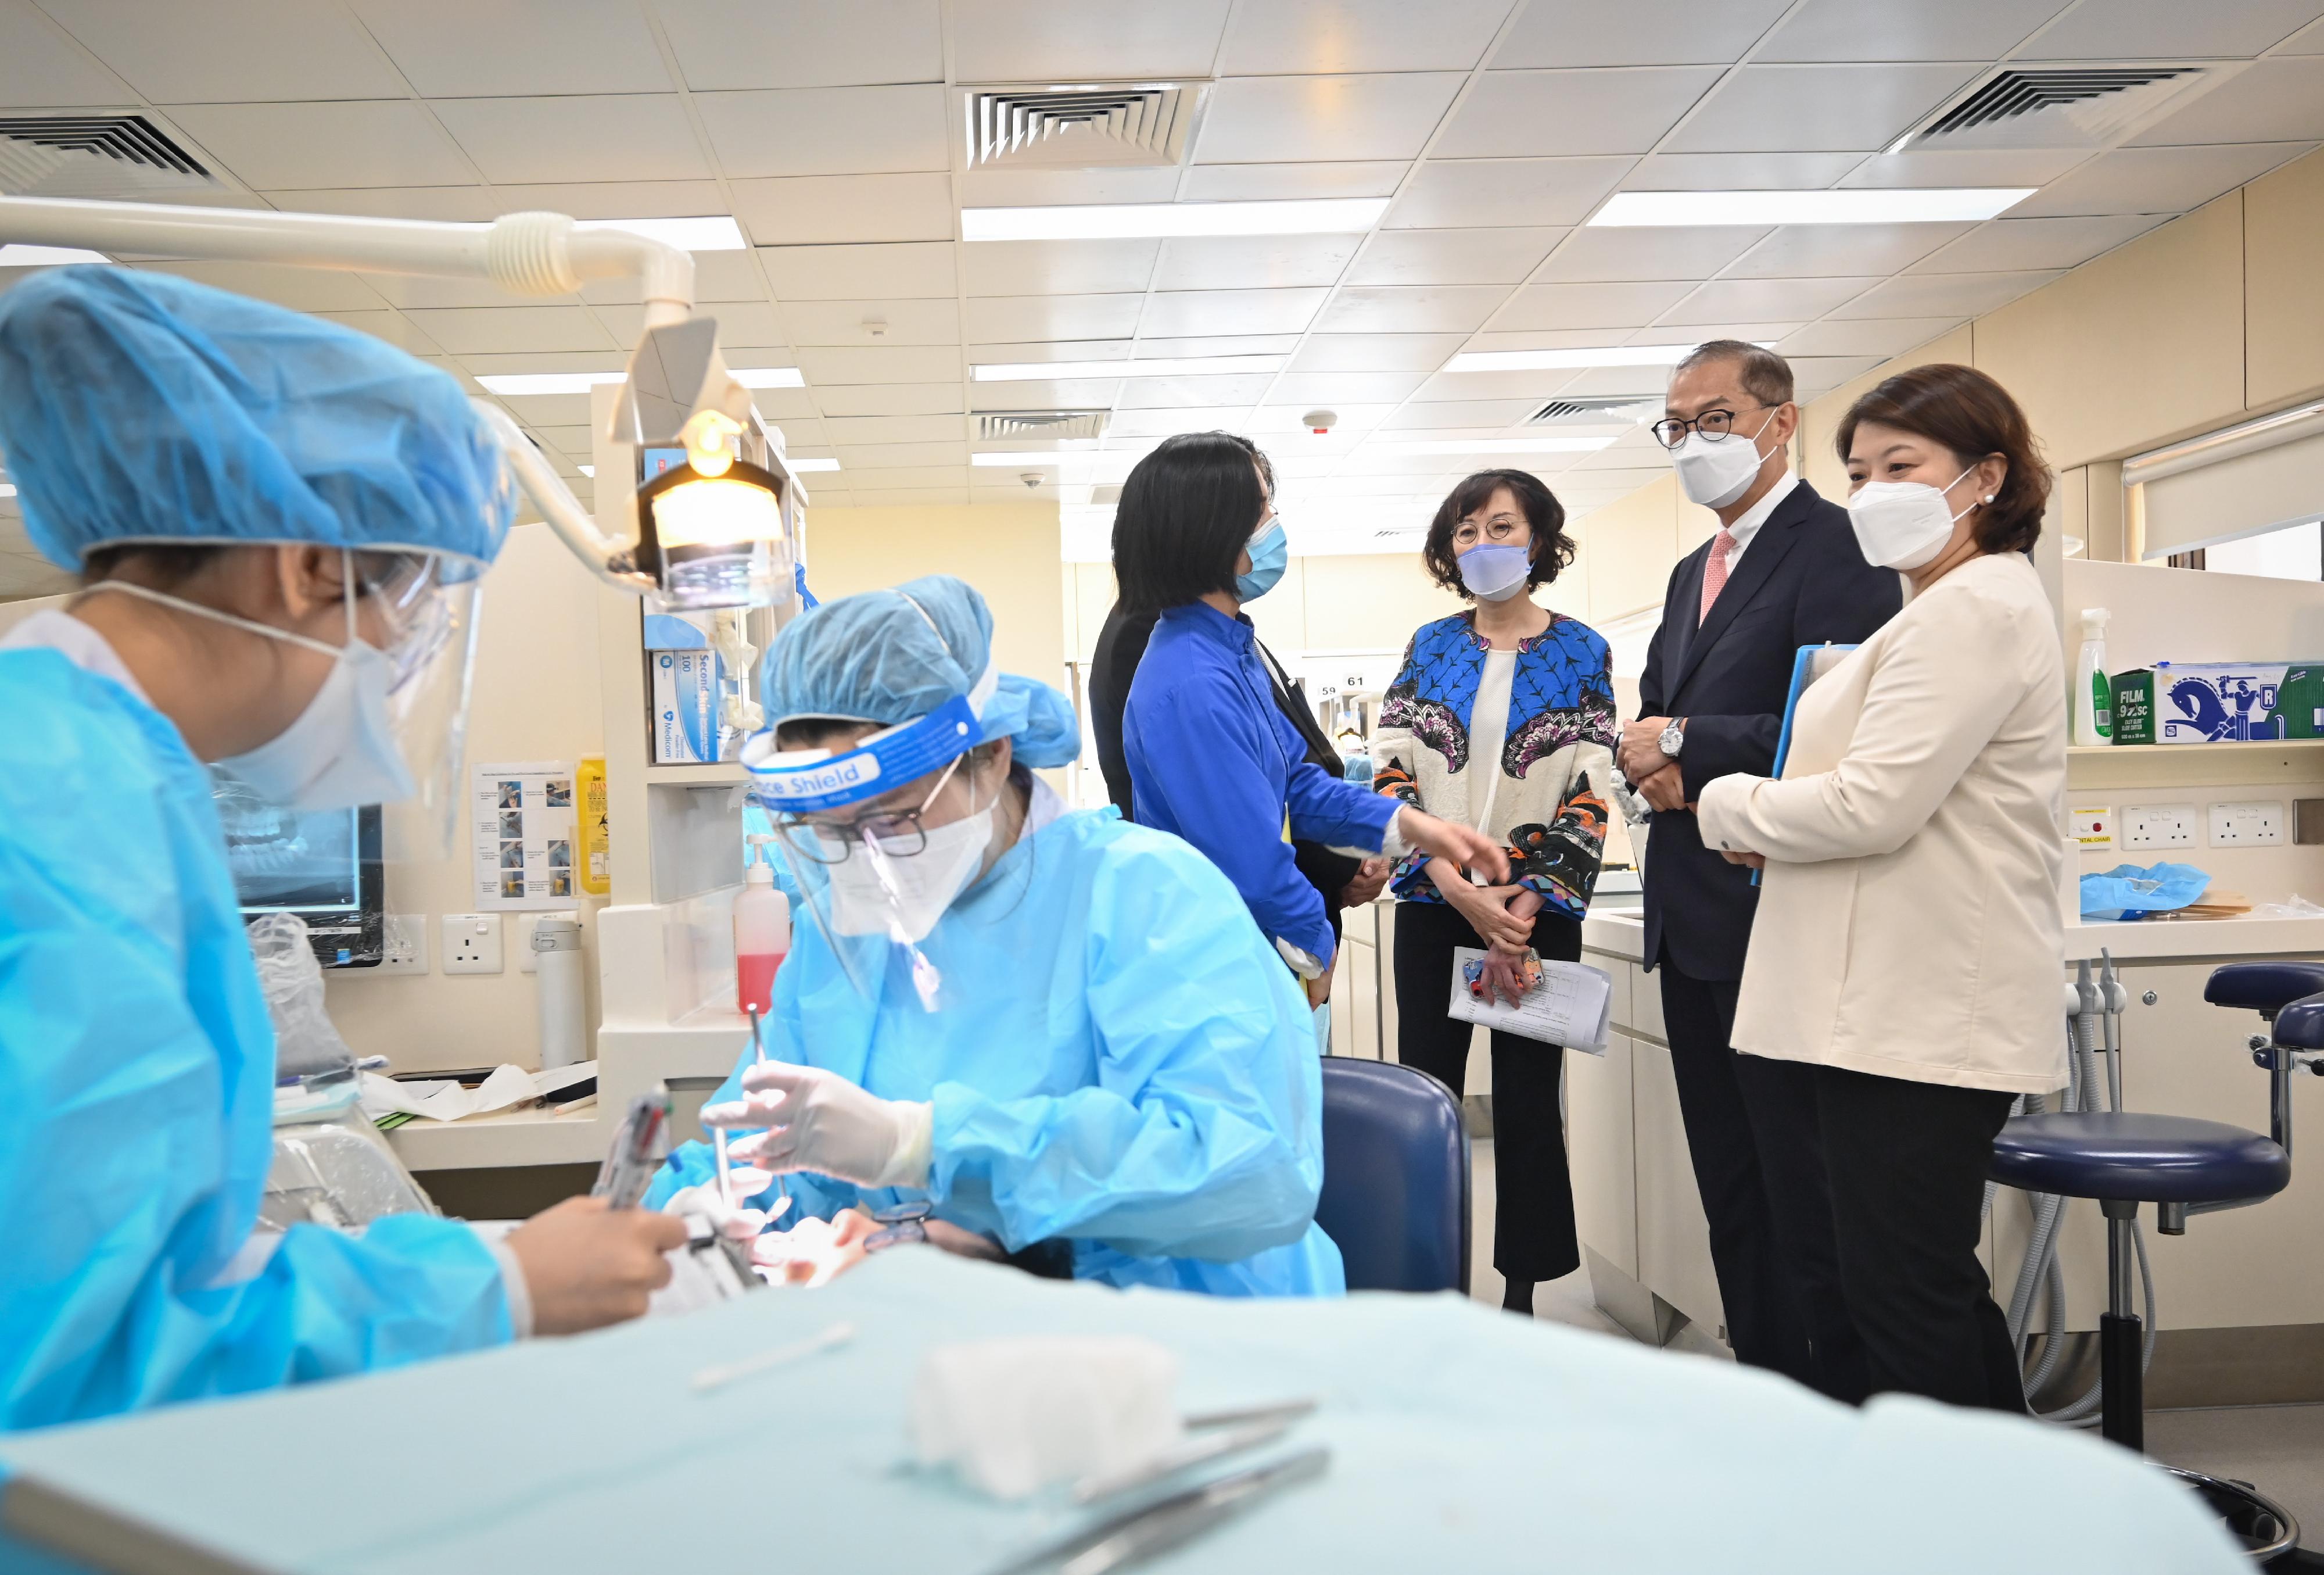 The Secretary for Health, Professor Lo Chung-mau (second right), and the Under Secretary for Health, Dr Libby Lee (first right), inspected the operation of the comprehensive dental clinic of the Prince Philip Dental Hospital during their visit there today (May 9).